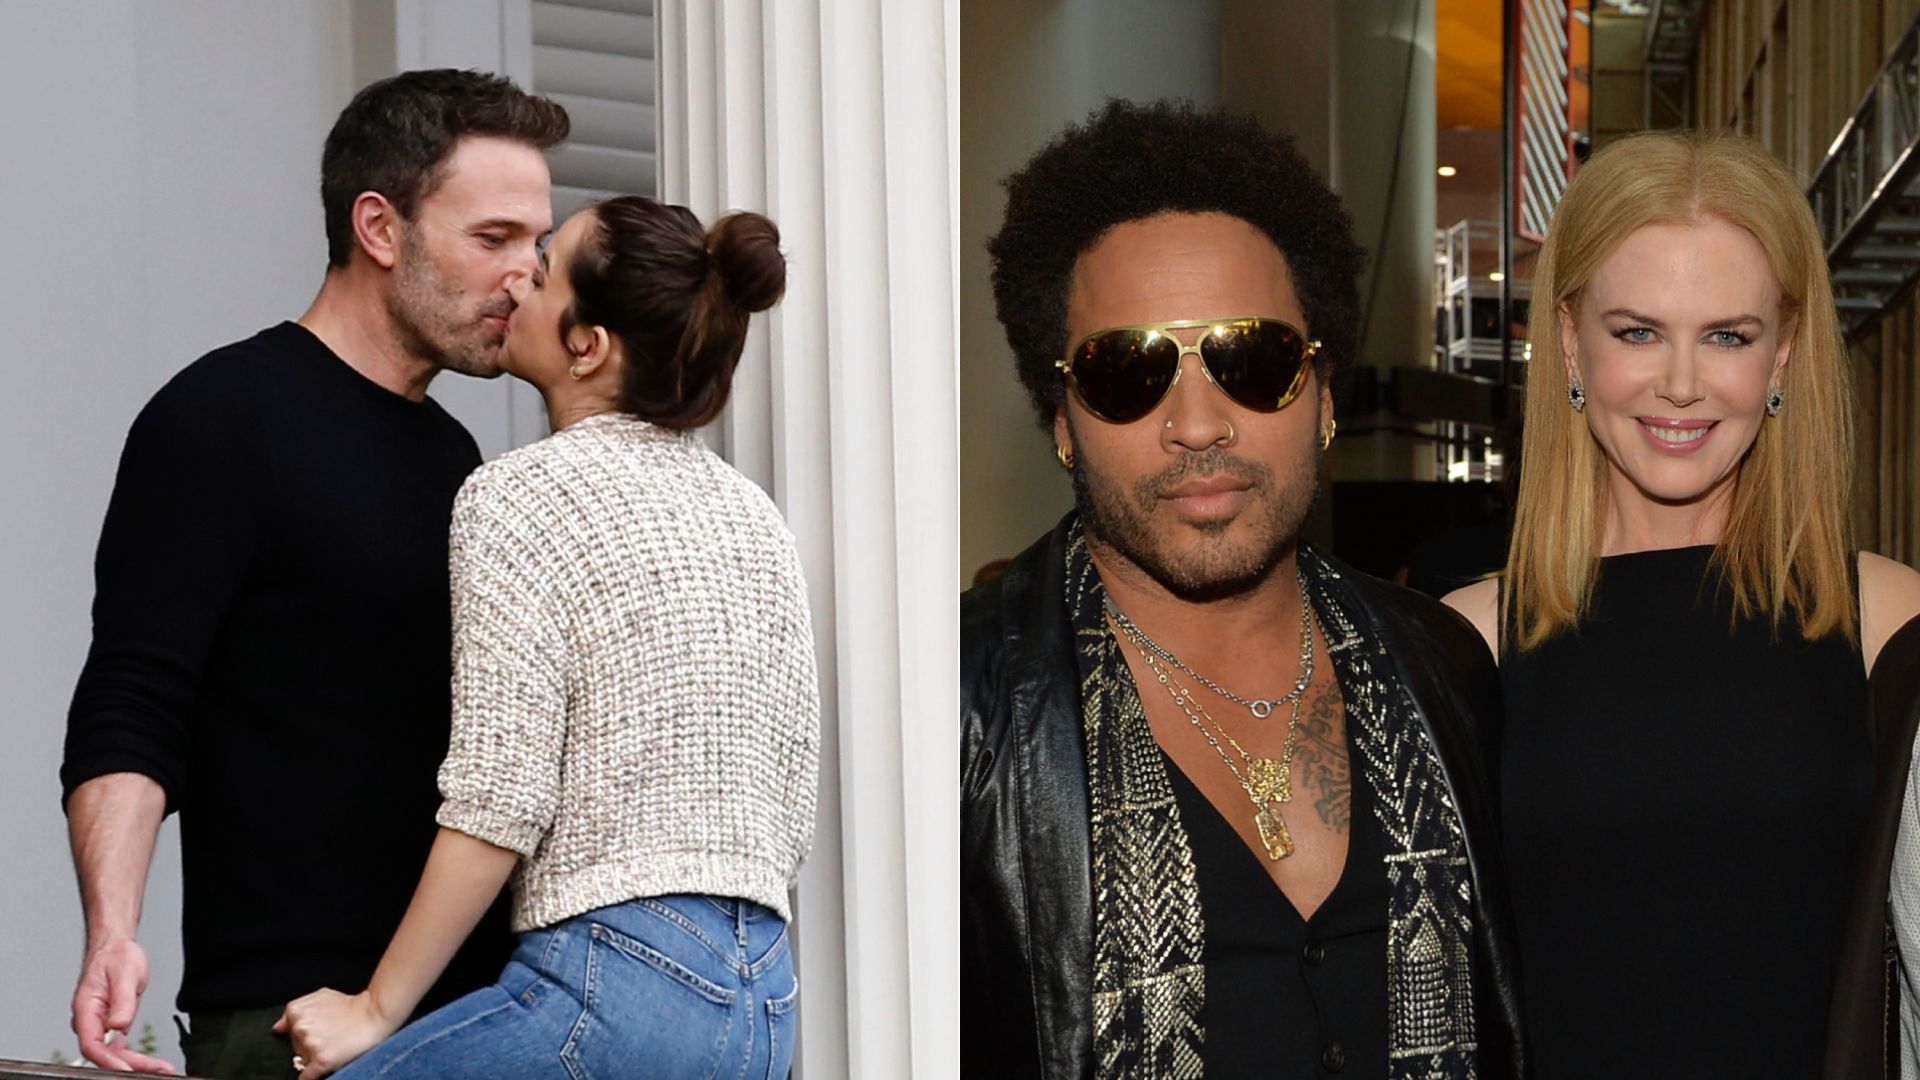 Forgotten celebrity couples: from Nicole Kidman and Lenny Kravitz, to Ben Affleck and Ana de Armas